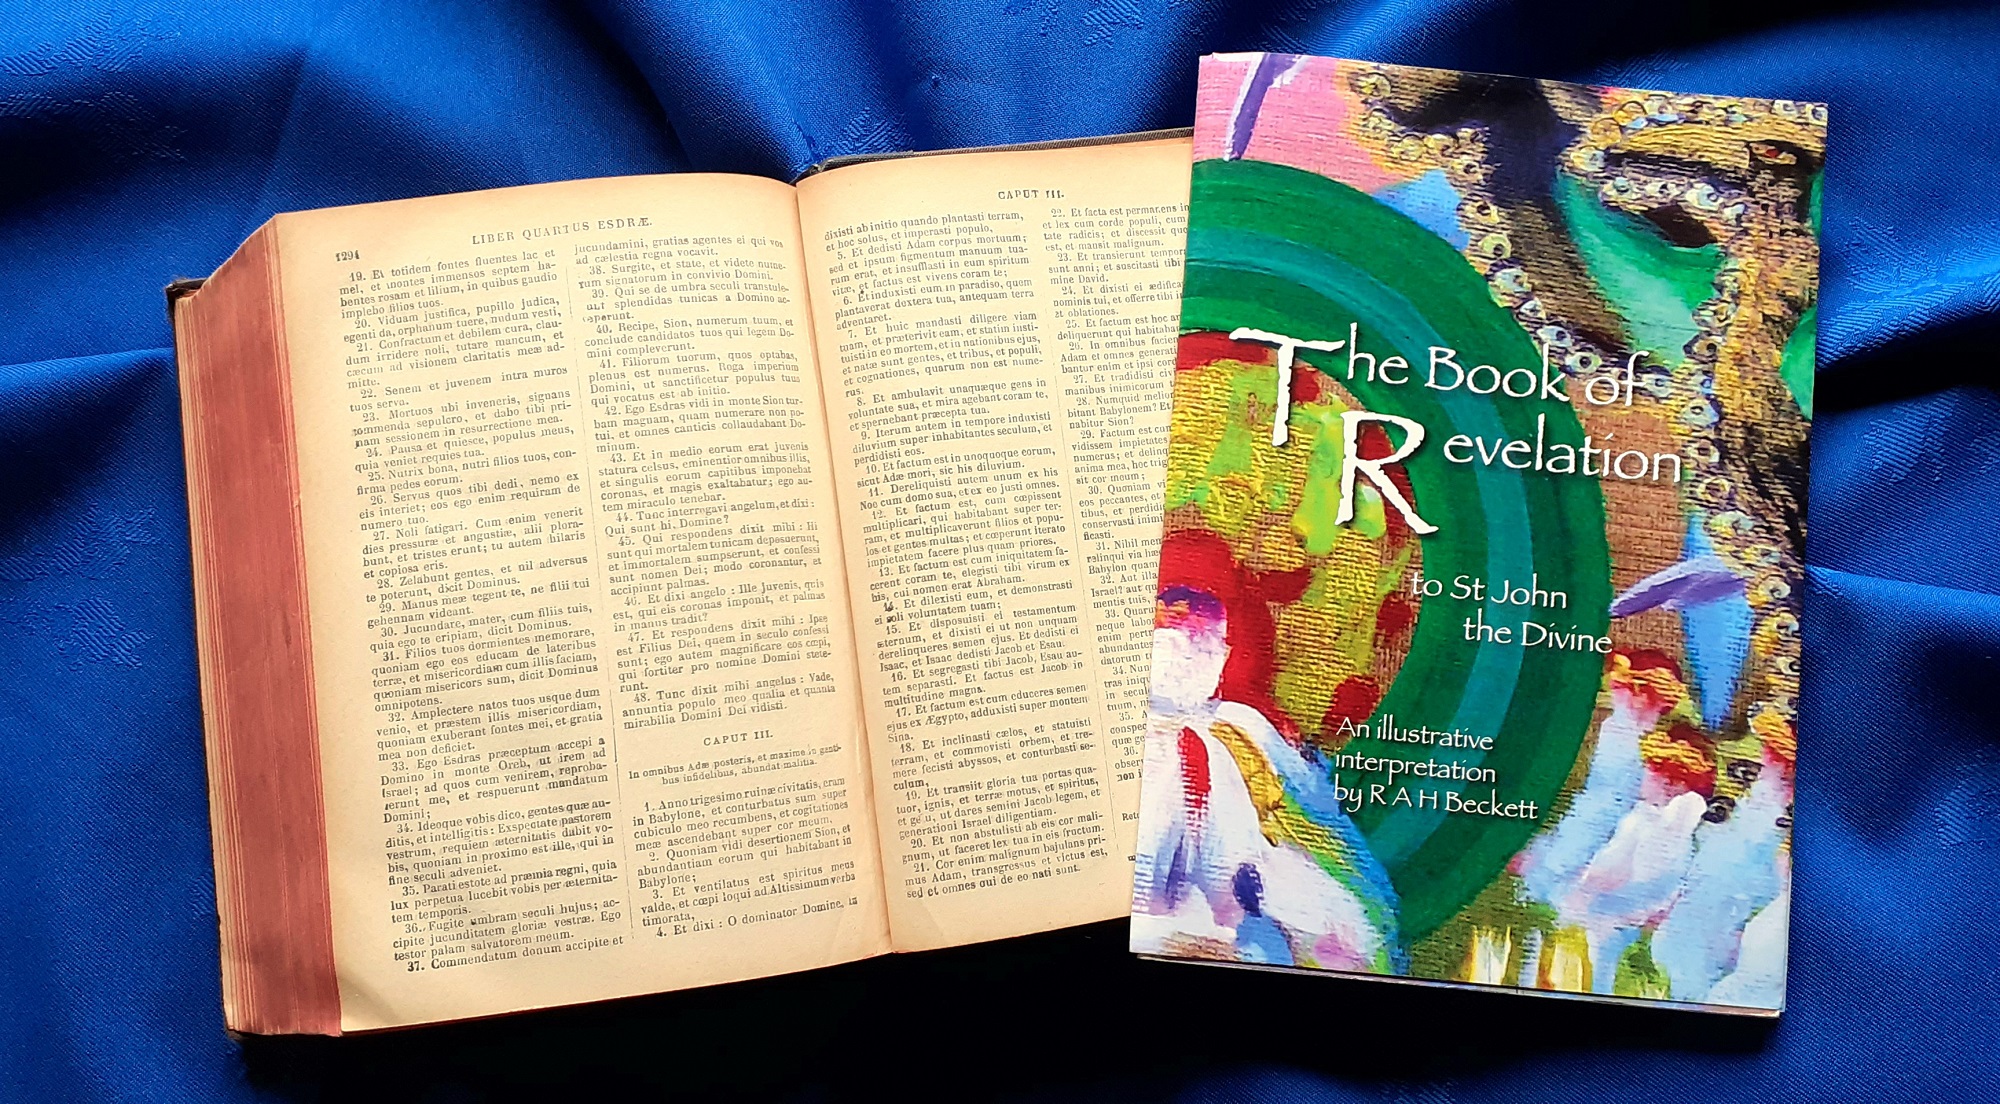 The Book of Revelation, both in the Latin and in our short English retelling.